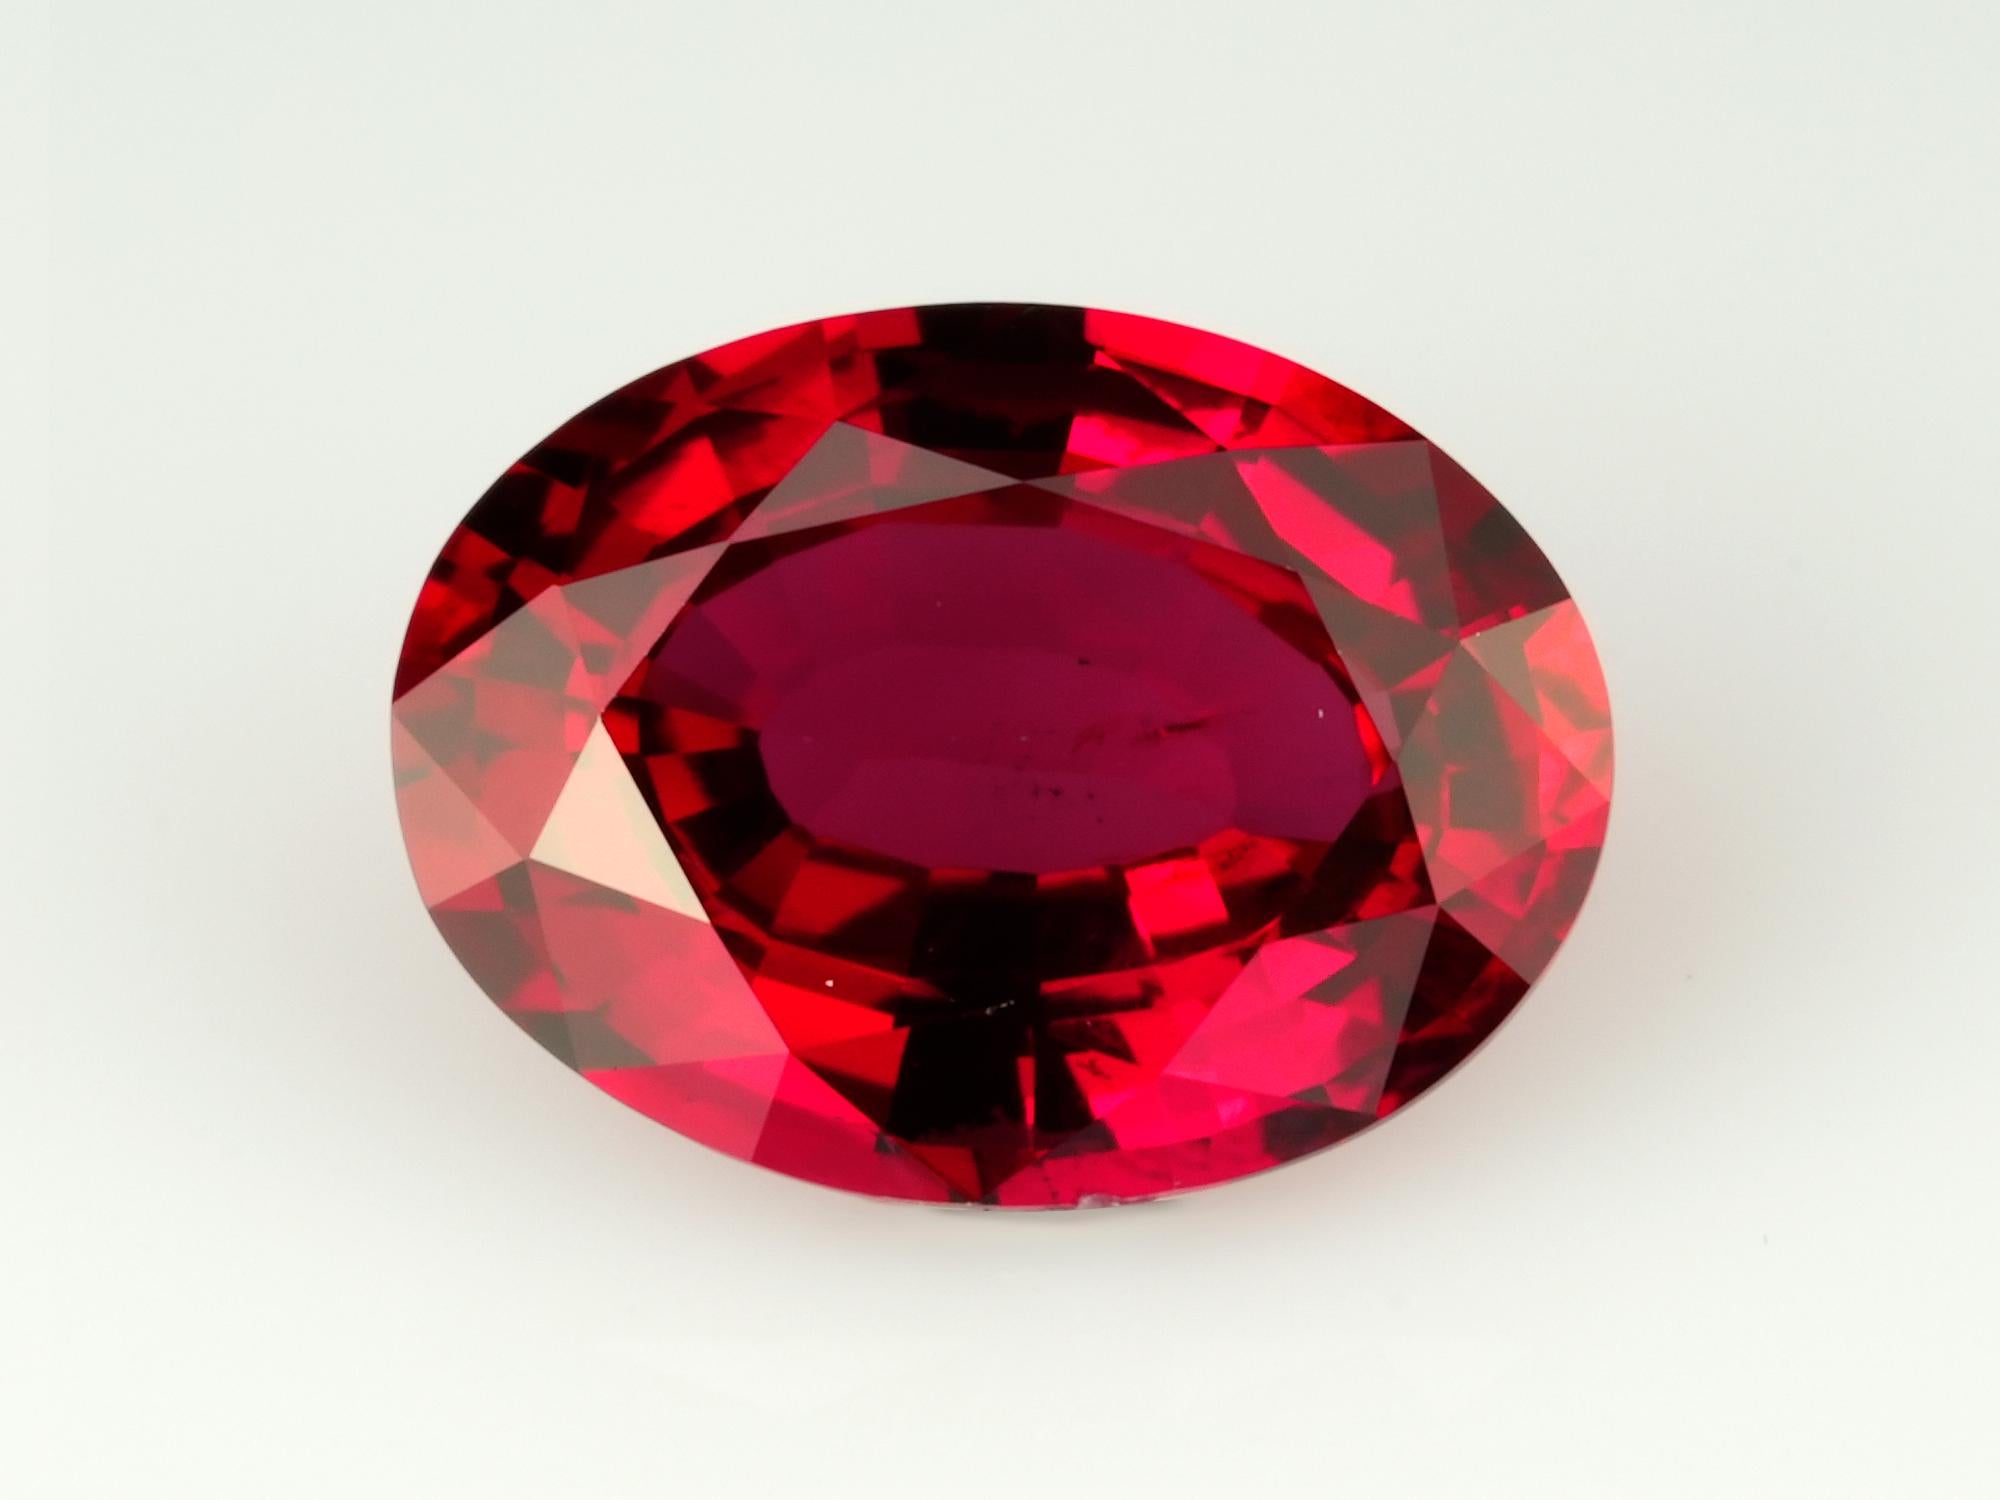 Ruby
Oval Shape
Color Red
Brilliant/Step Cut
Dimension 5.23x6.98x2.86
Weight 0.944 cts.

GEM RARITY: UNEARTHLY THE RAREST GEM

Witness the unique journey of colored gemstones, experience a new level of iconic statements and innovation.

GEM RARITY